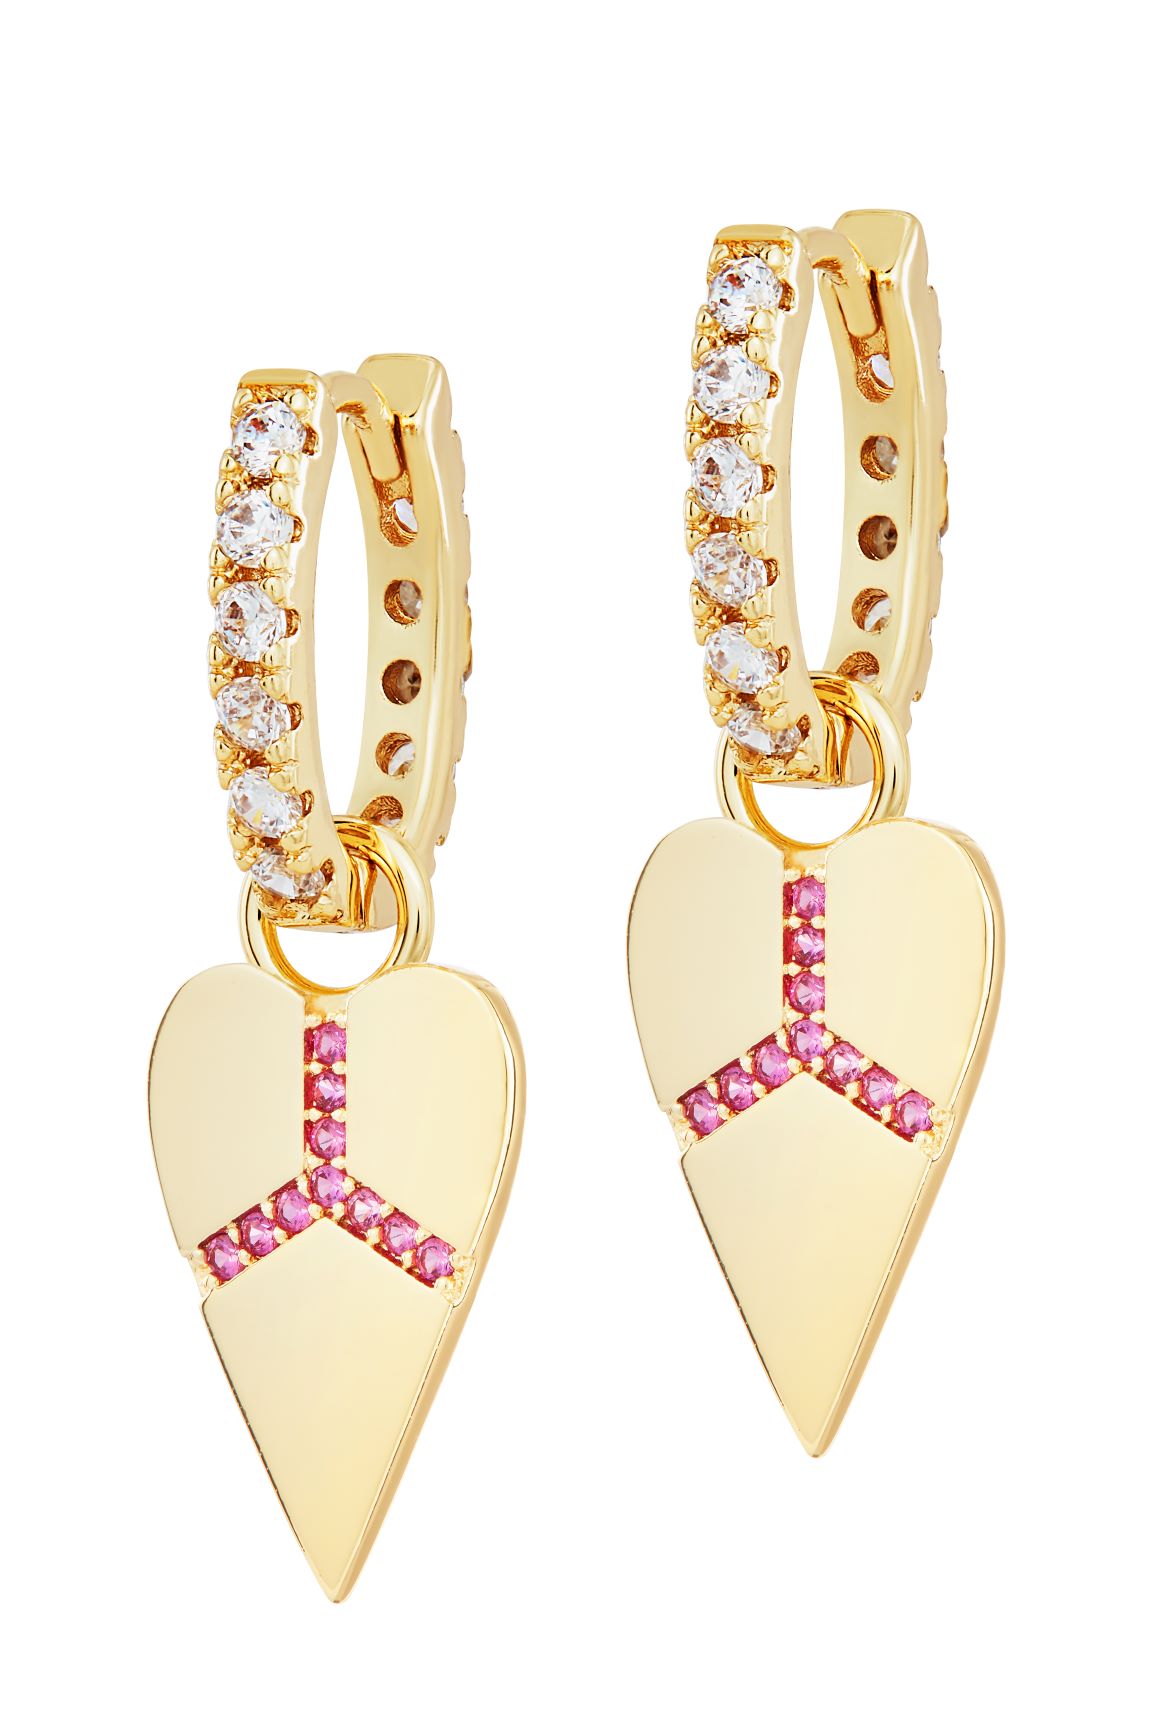 NEW! Peace And Love Earrings Celeste Starre *WAS £140*